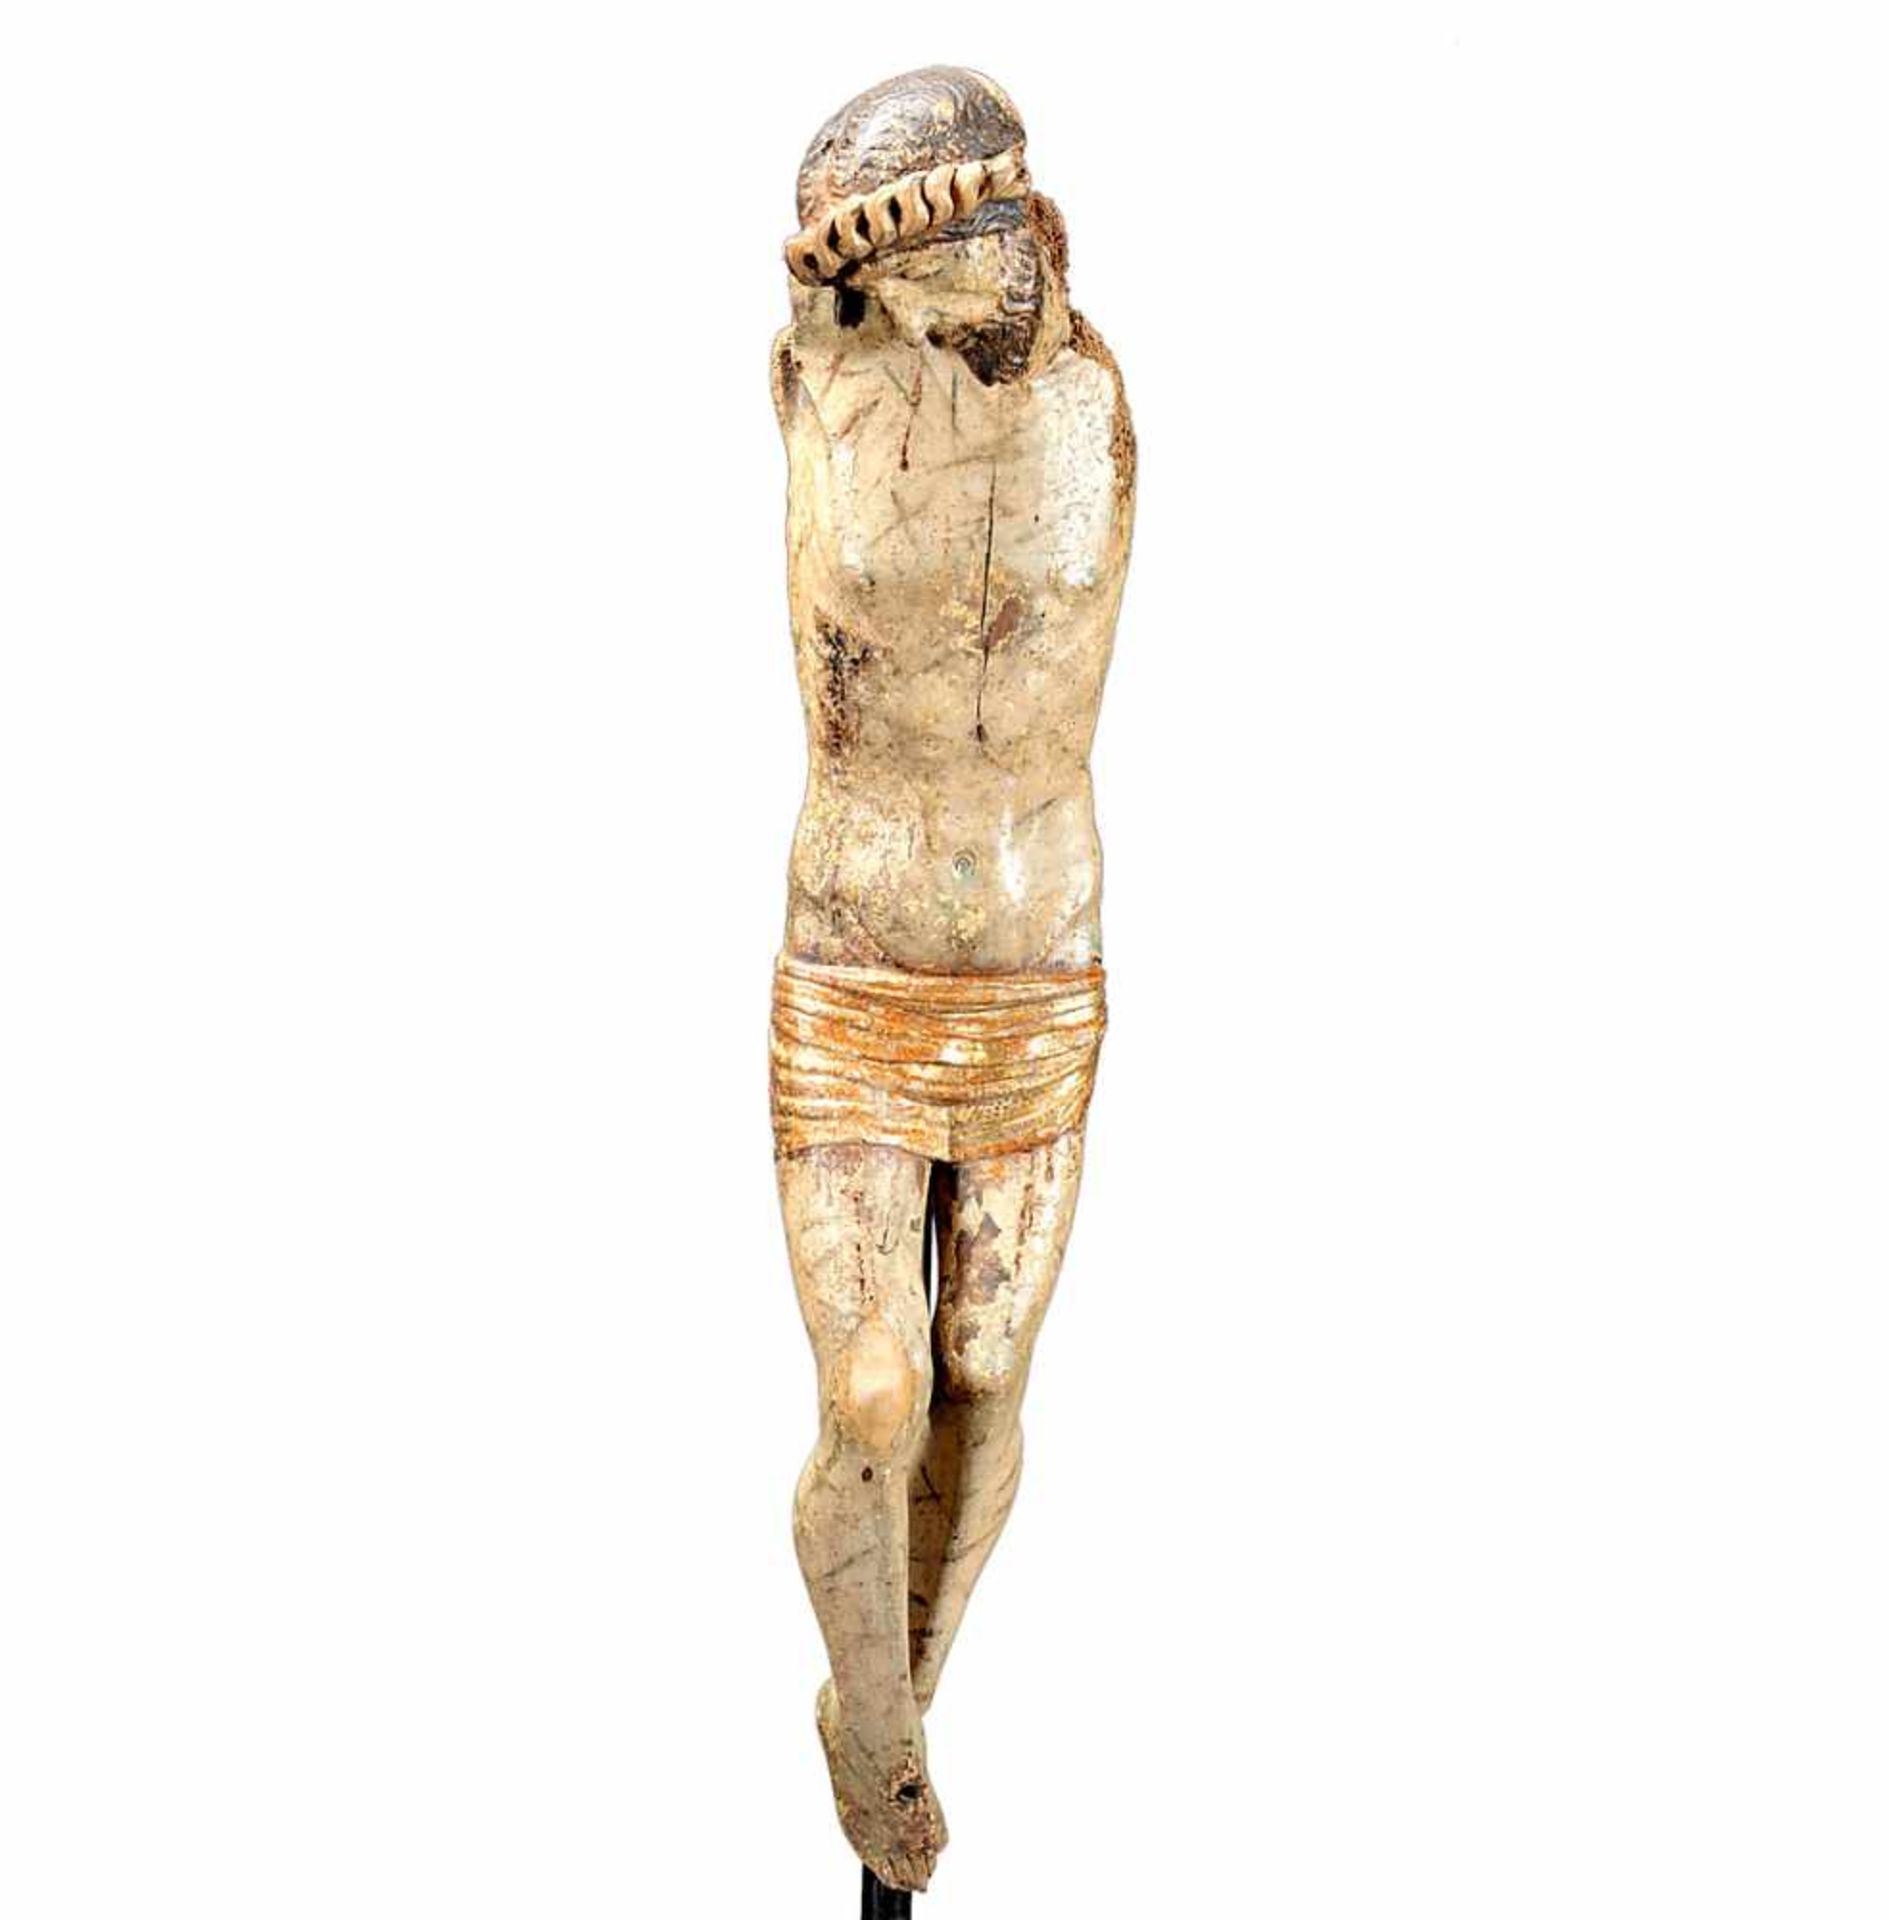 CASTILIAN SCHOOL, PROBABLY FROM BURGOS OR PALENCIA, CIRCA 1510. Crucified Christ.Sculpture in